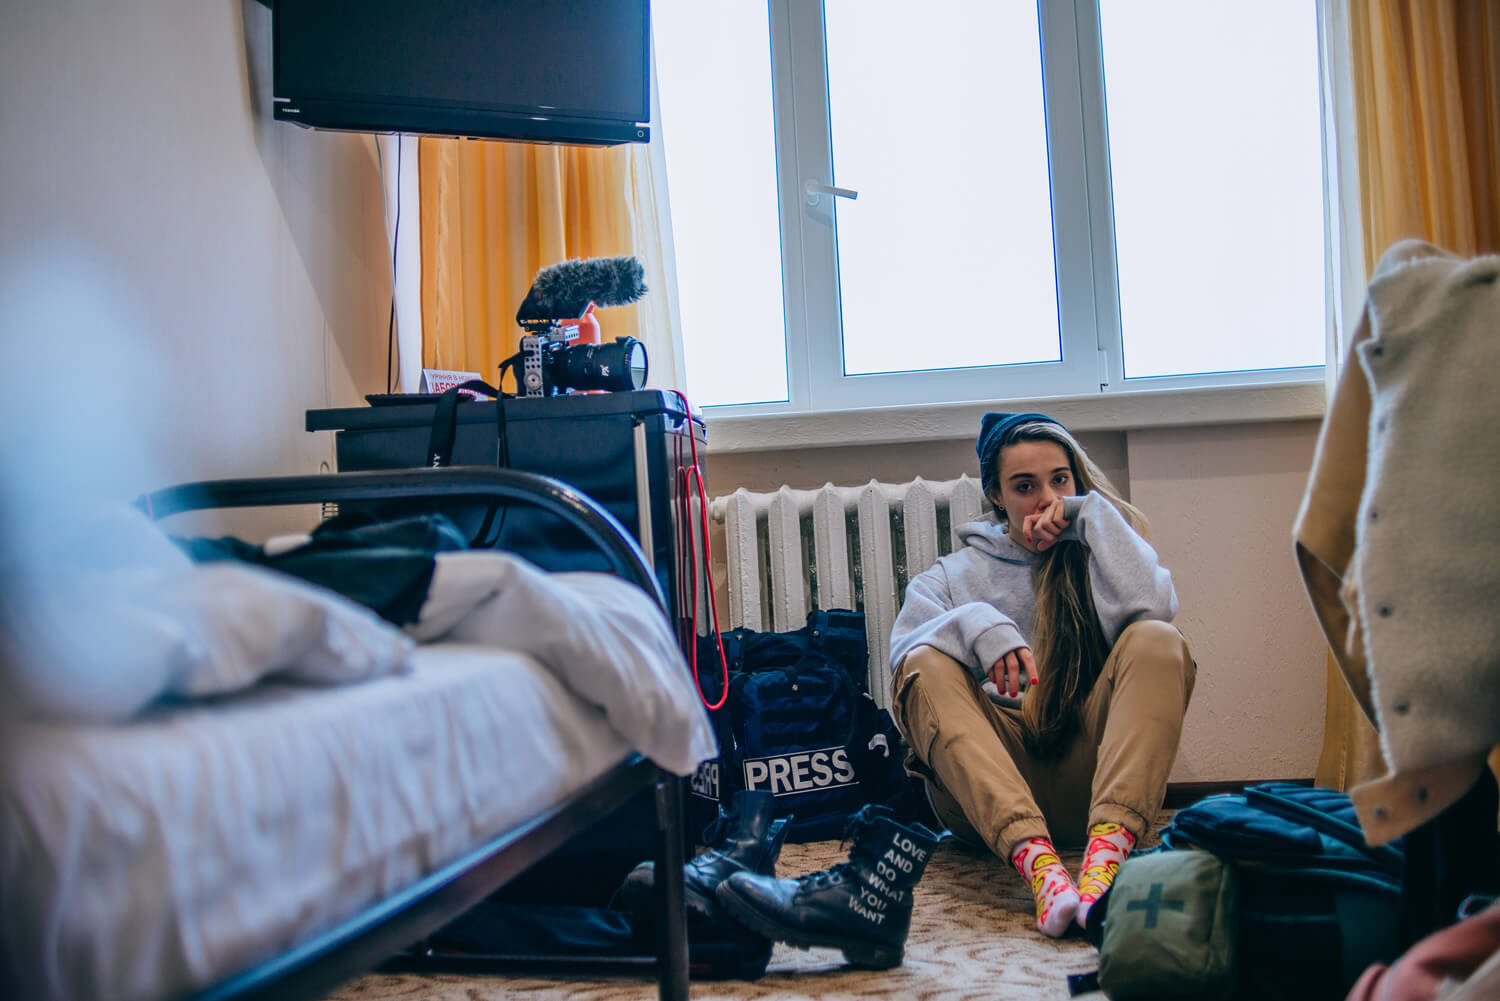 A young woman journalist sits thoughtfully on the floor, surrounded by her equipment, in a hotel room, capturing a moment of repose amidst the chaos of reporting.